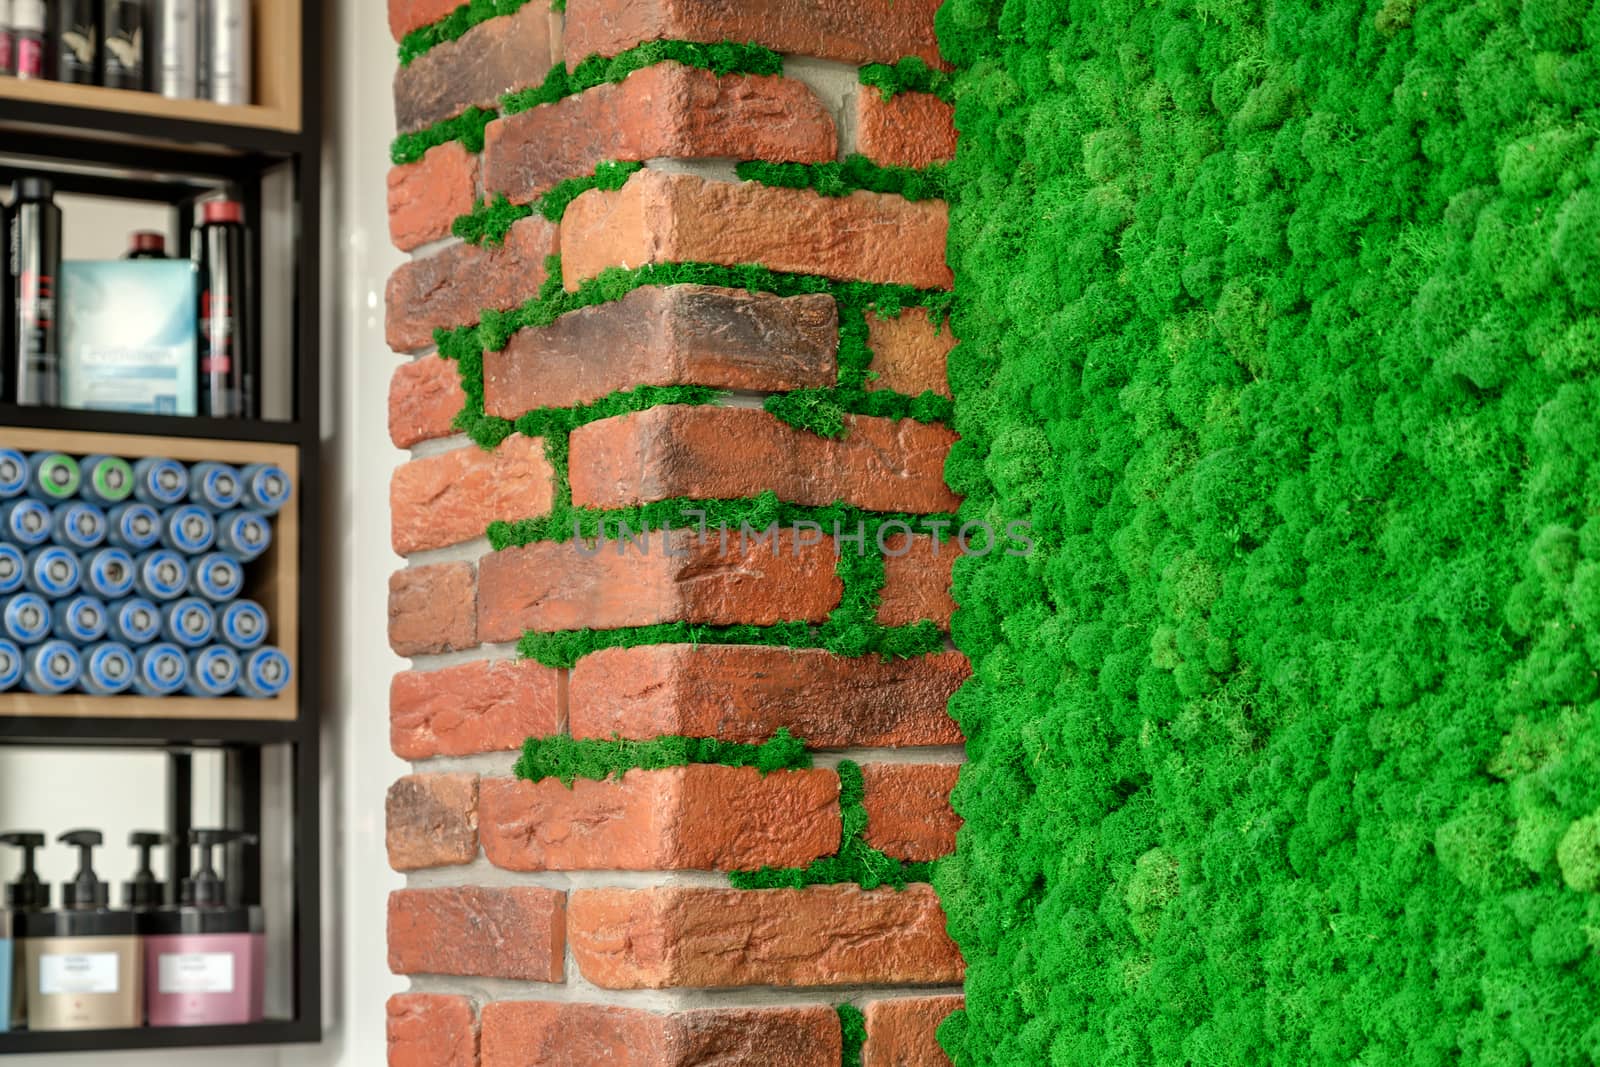 Brick wall with decorative green moss and a shelving in the background